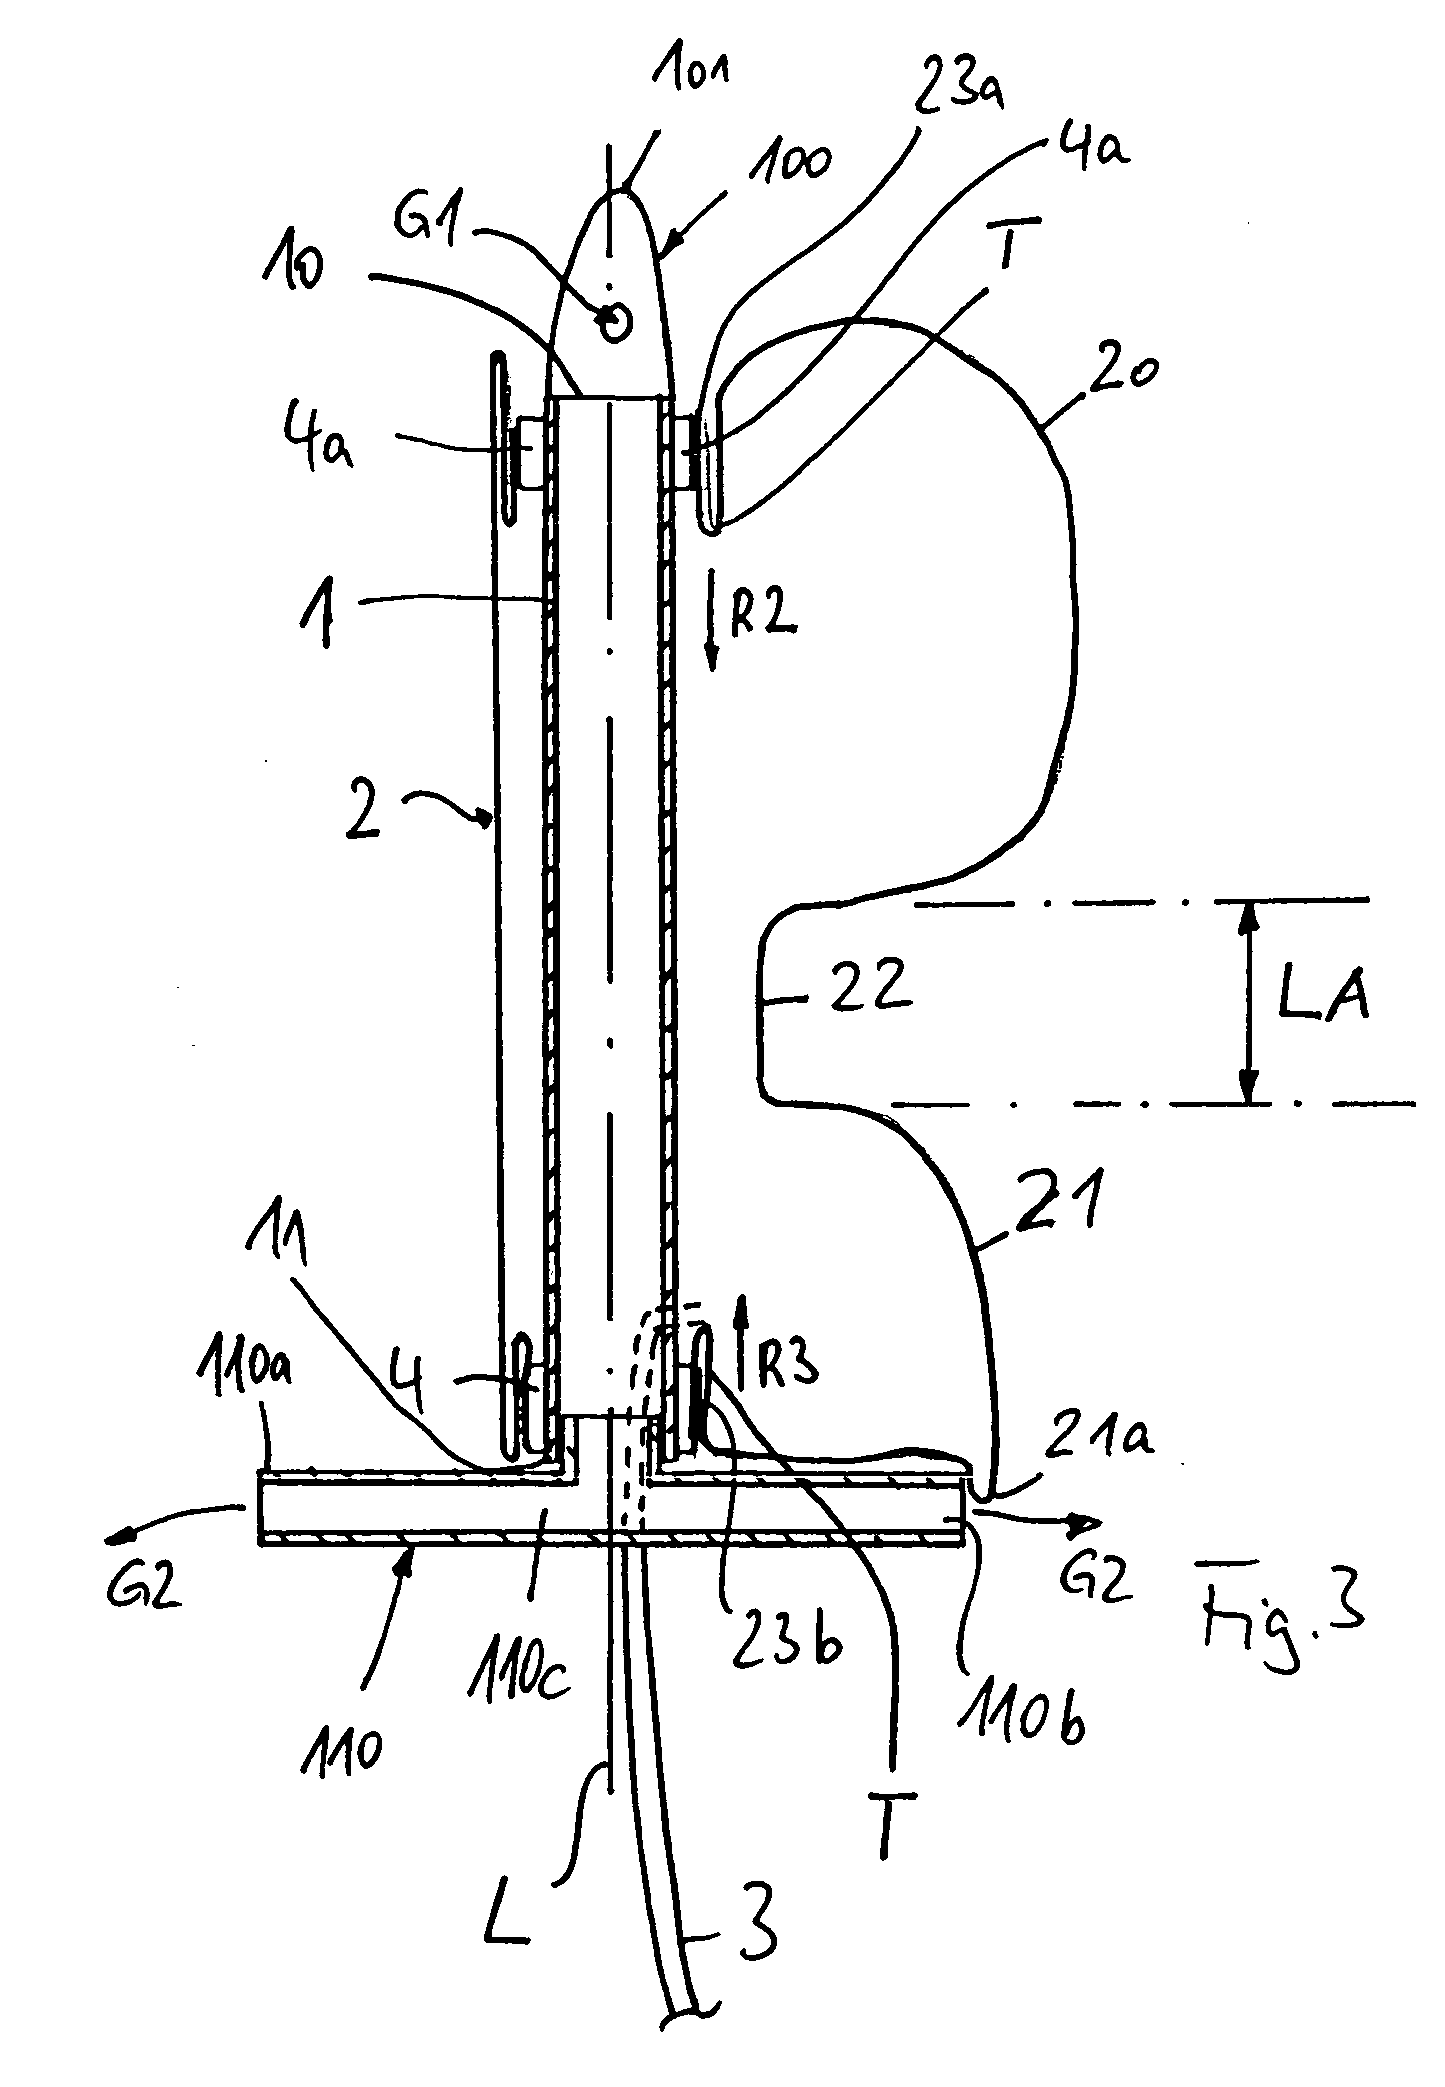 Occlusion System for Management of Rectal or Anal Incontinence